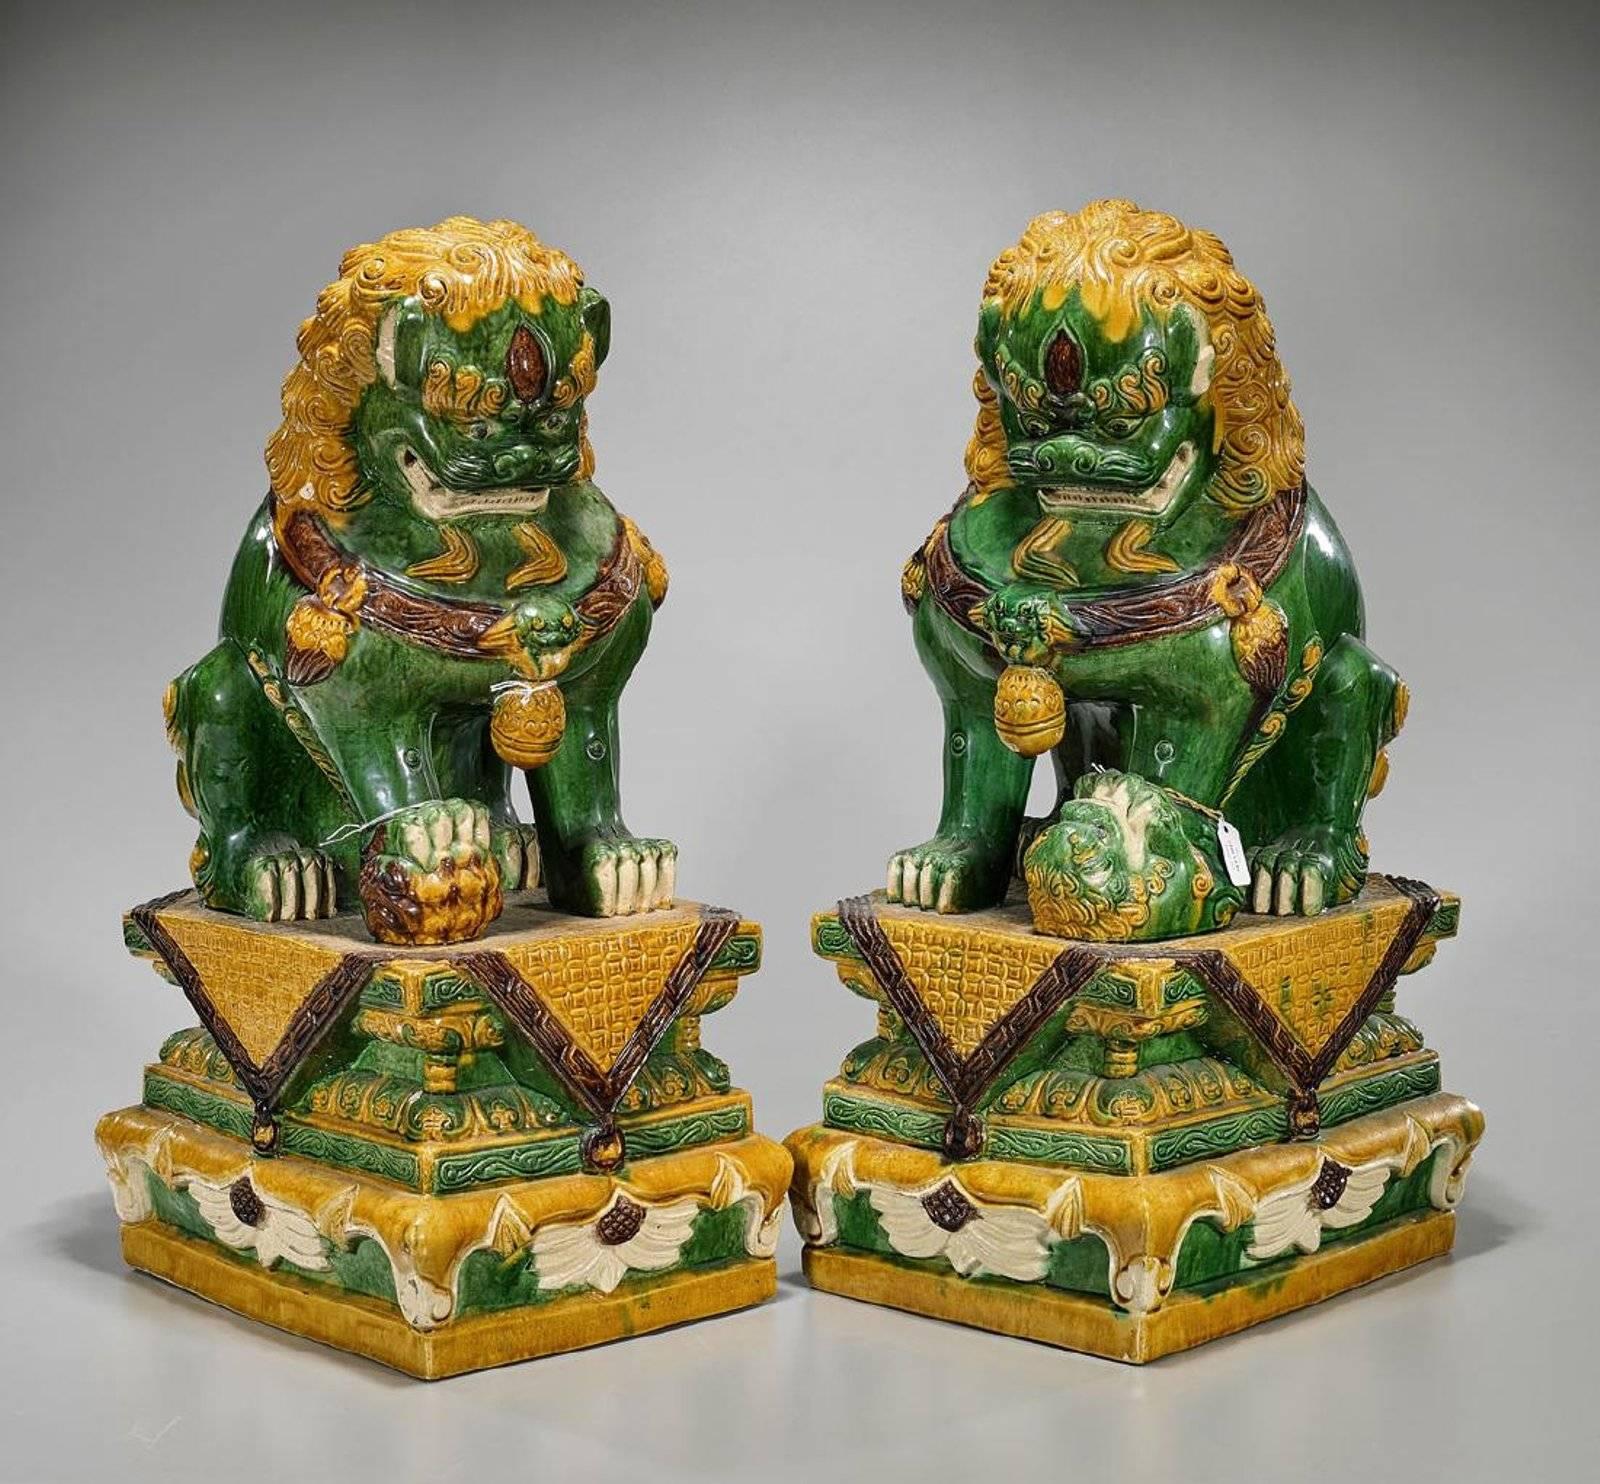 Extremely decorative and colorful pair of Chinese Sancai glazed statues in the form of foo dog lions on resting on pedestals with a ball in their front paws. Each in a mirrored format with open jaws.

Each measures approximately 23